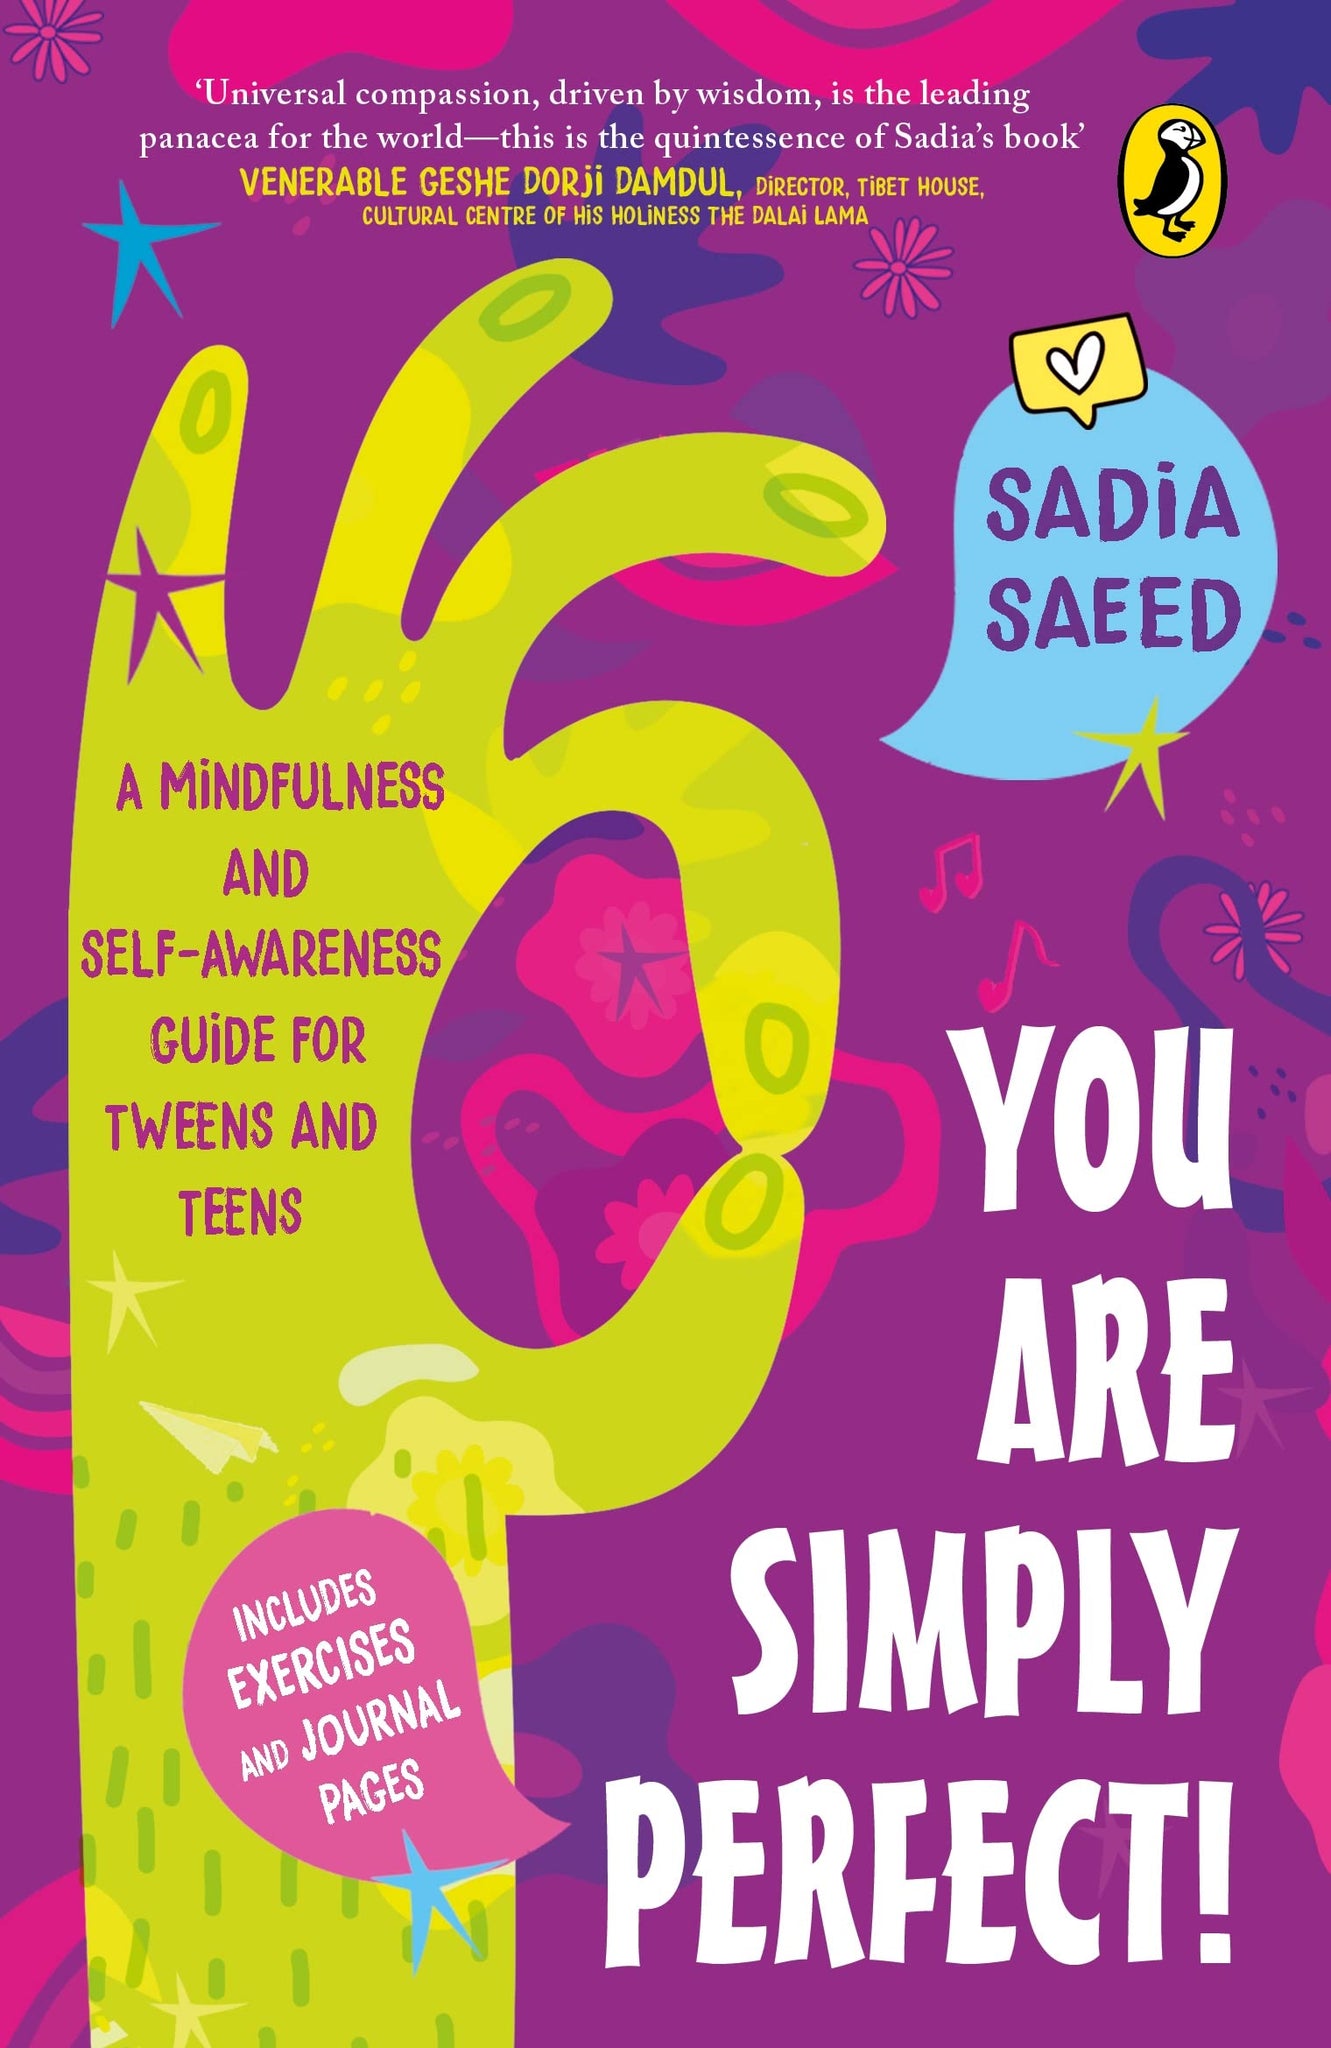 You Are Simply Perfect! A Mindfulness and Self-Awareness Guide for Tweens and Teens: (Includes exercises and journal pages!) - Paperback